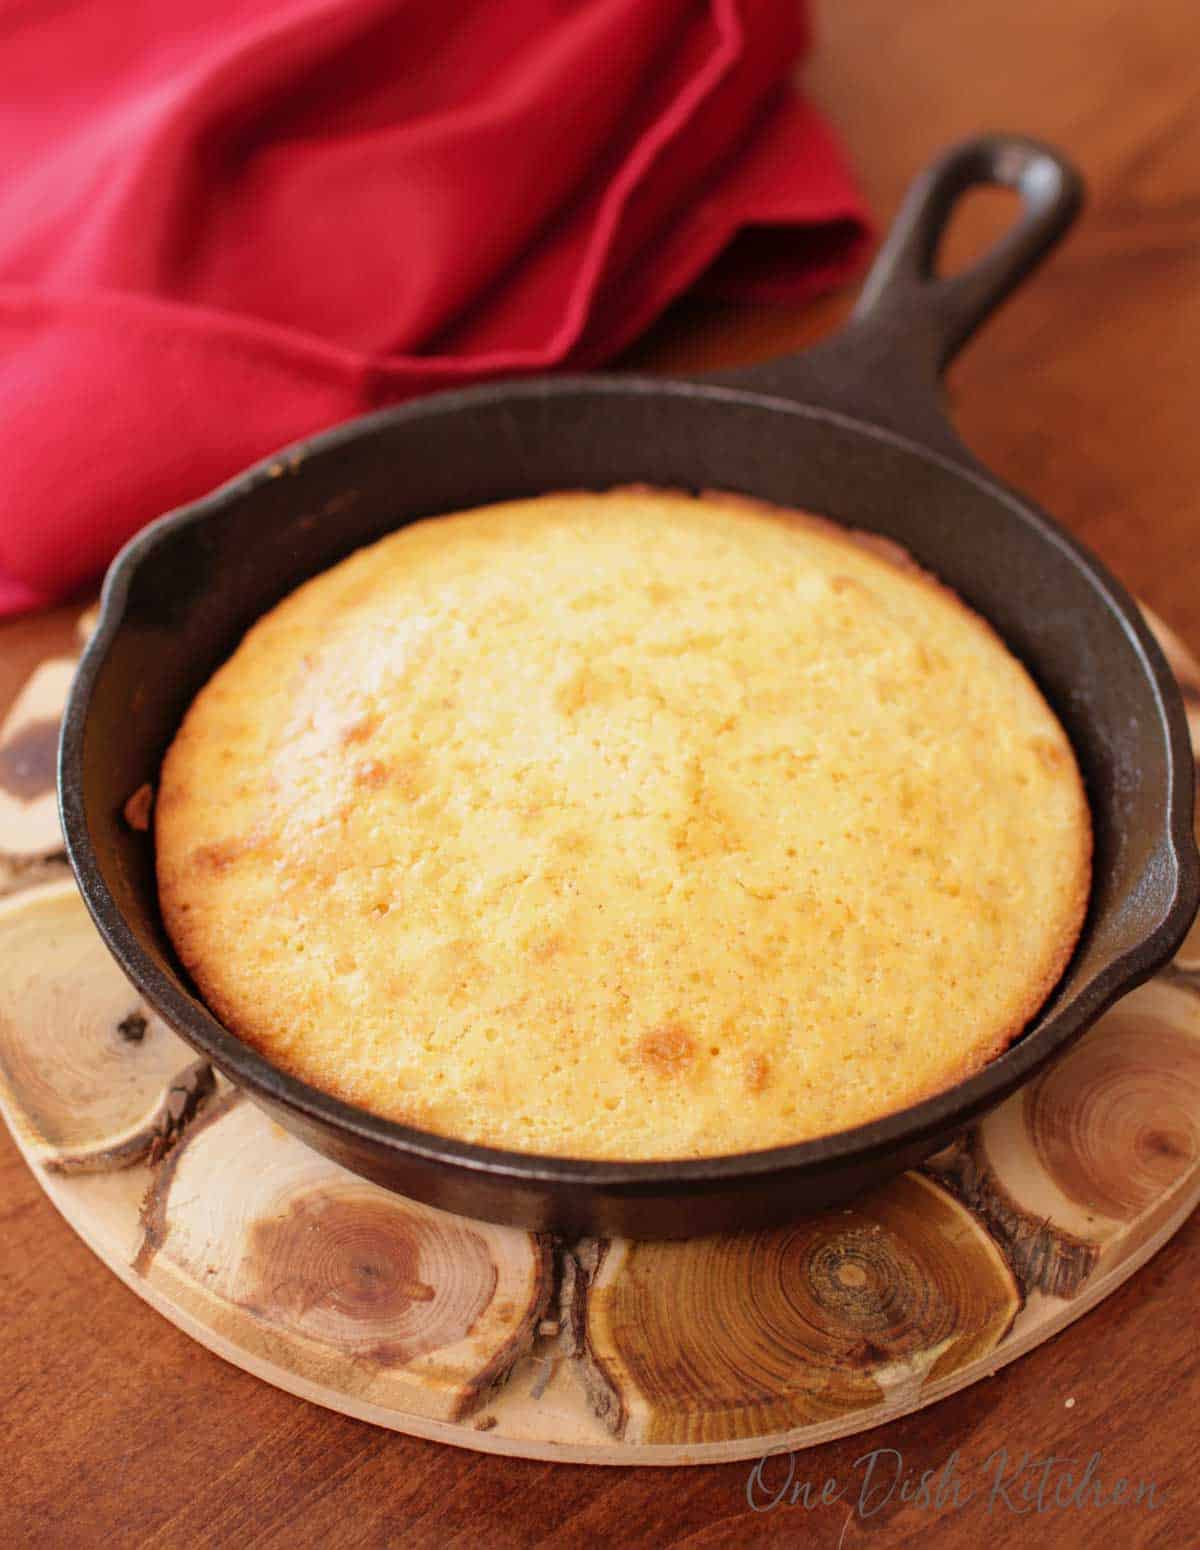 Cornbread in a small cast iron skillet next to a red napkin on a wooden trivet.